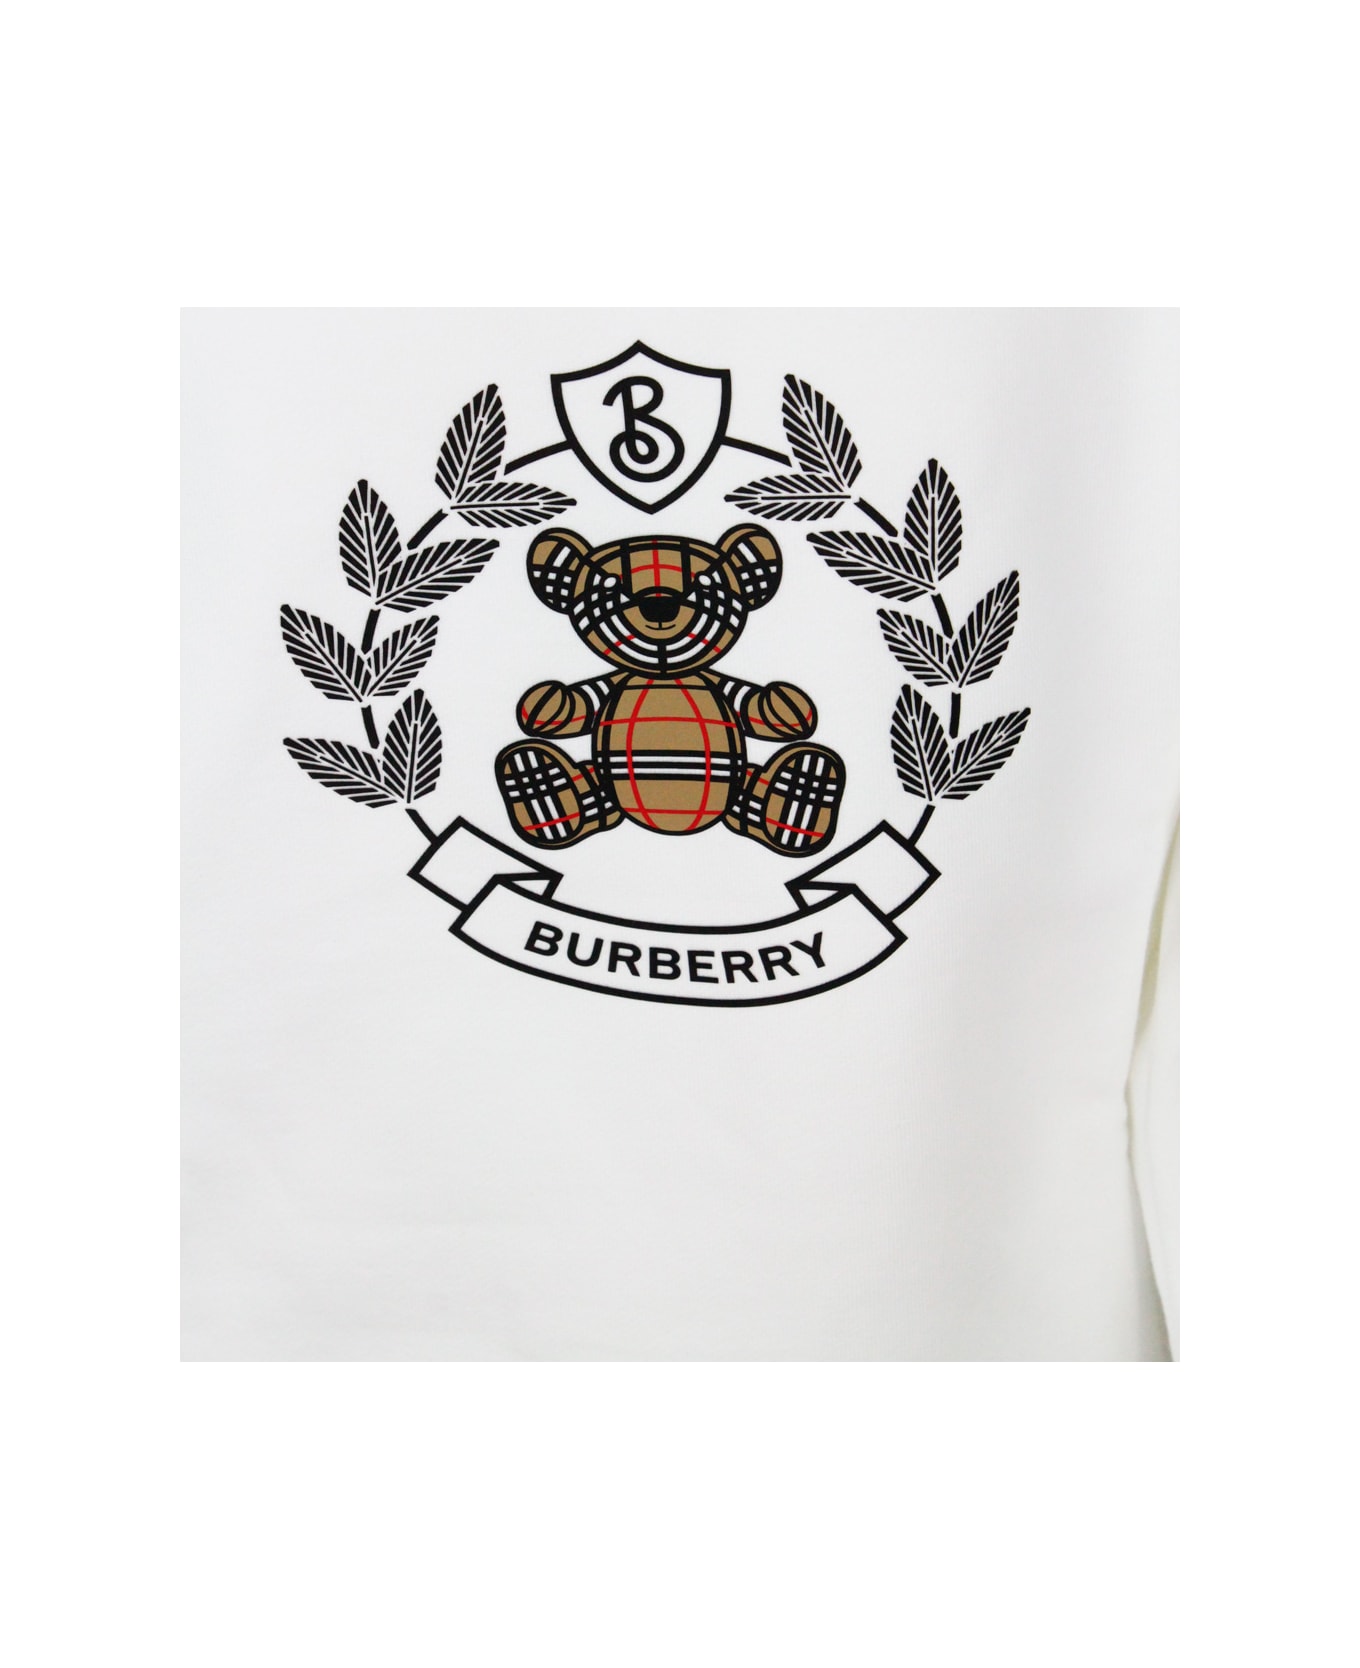 Burberry Crewneck Sweatshirt In Cotton Jersey With Classic Check Teddy Bear Print On The Front - White